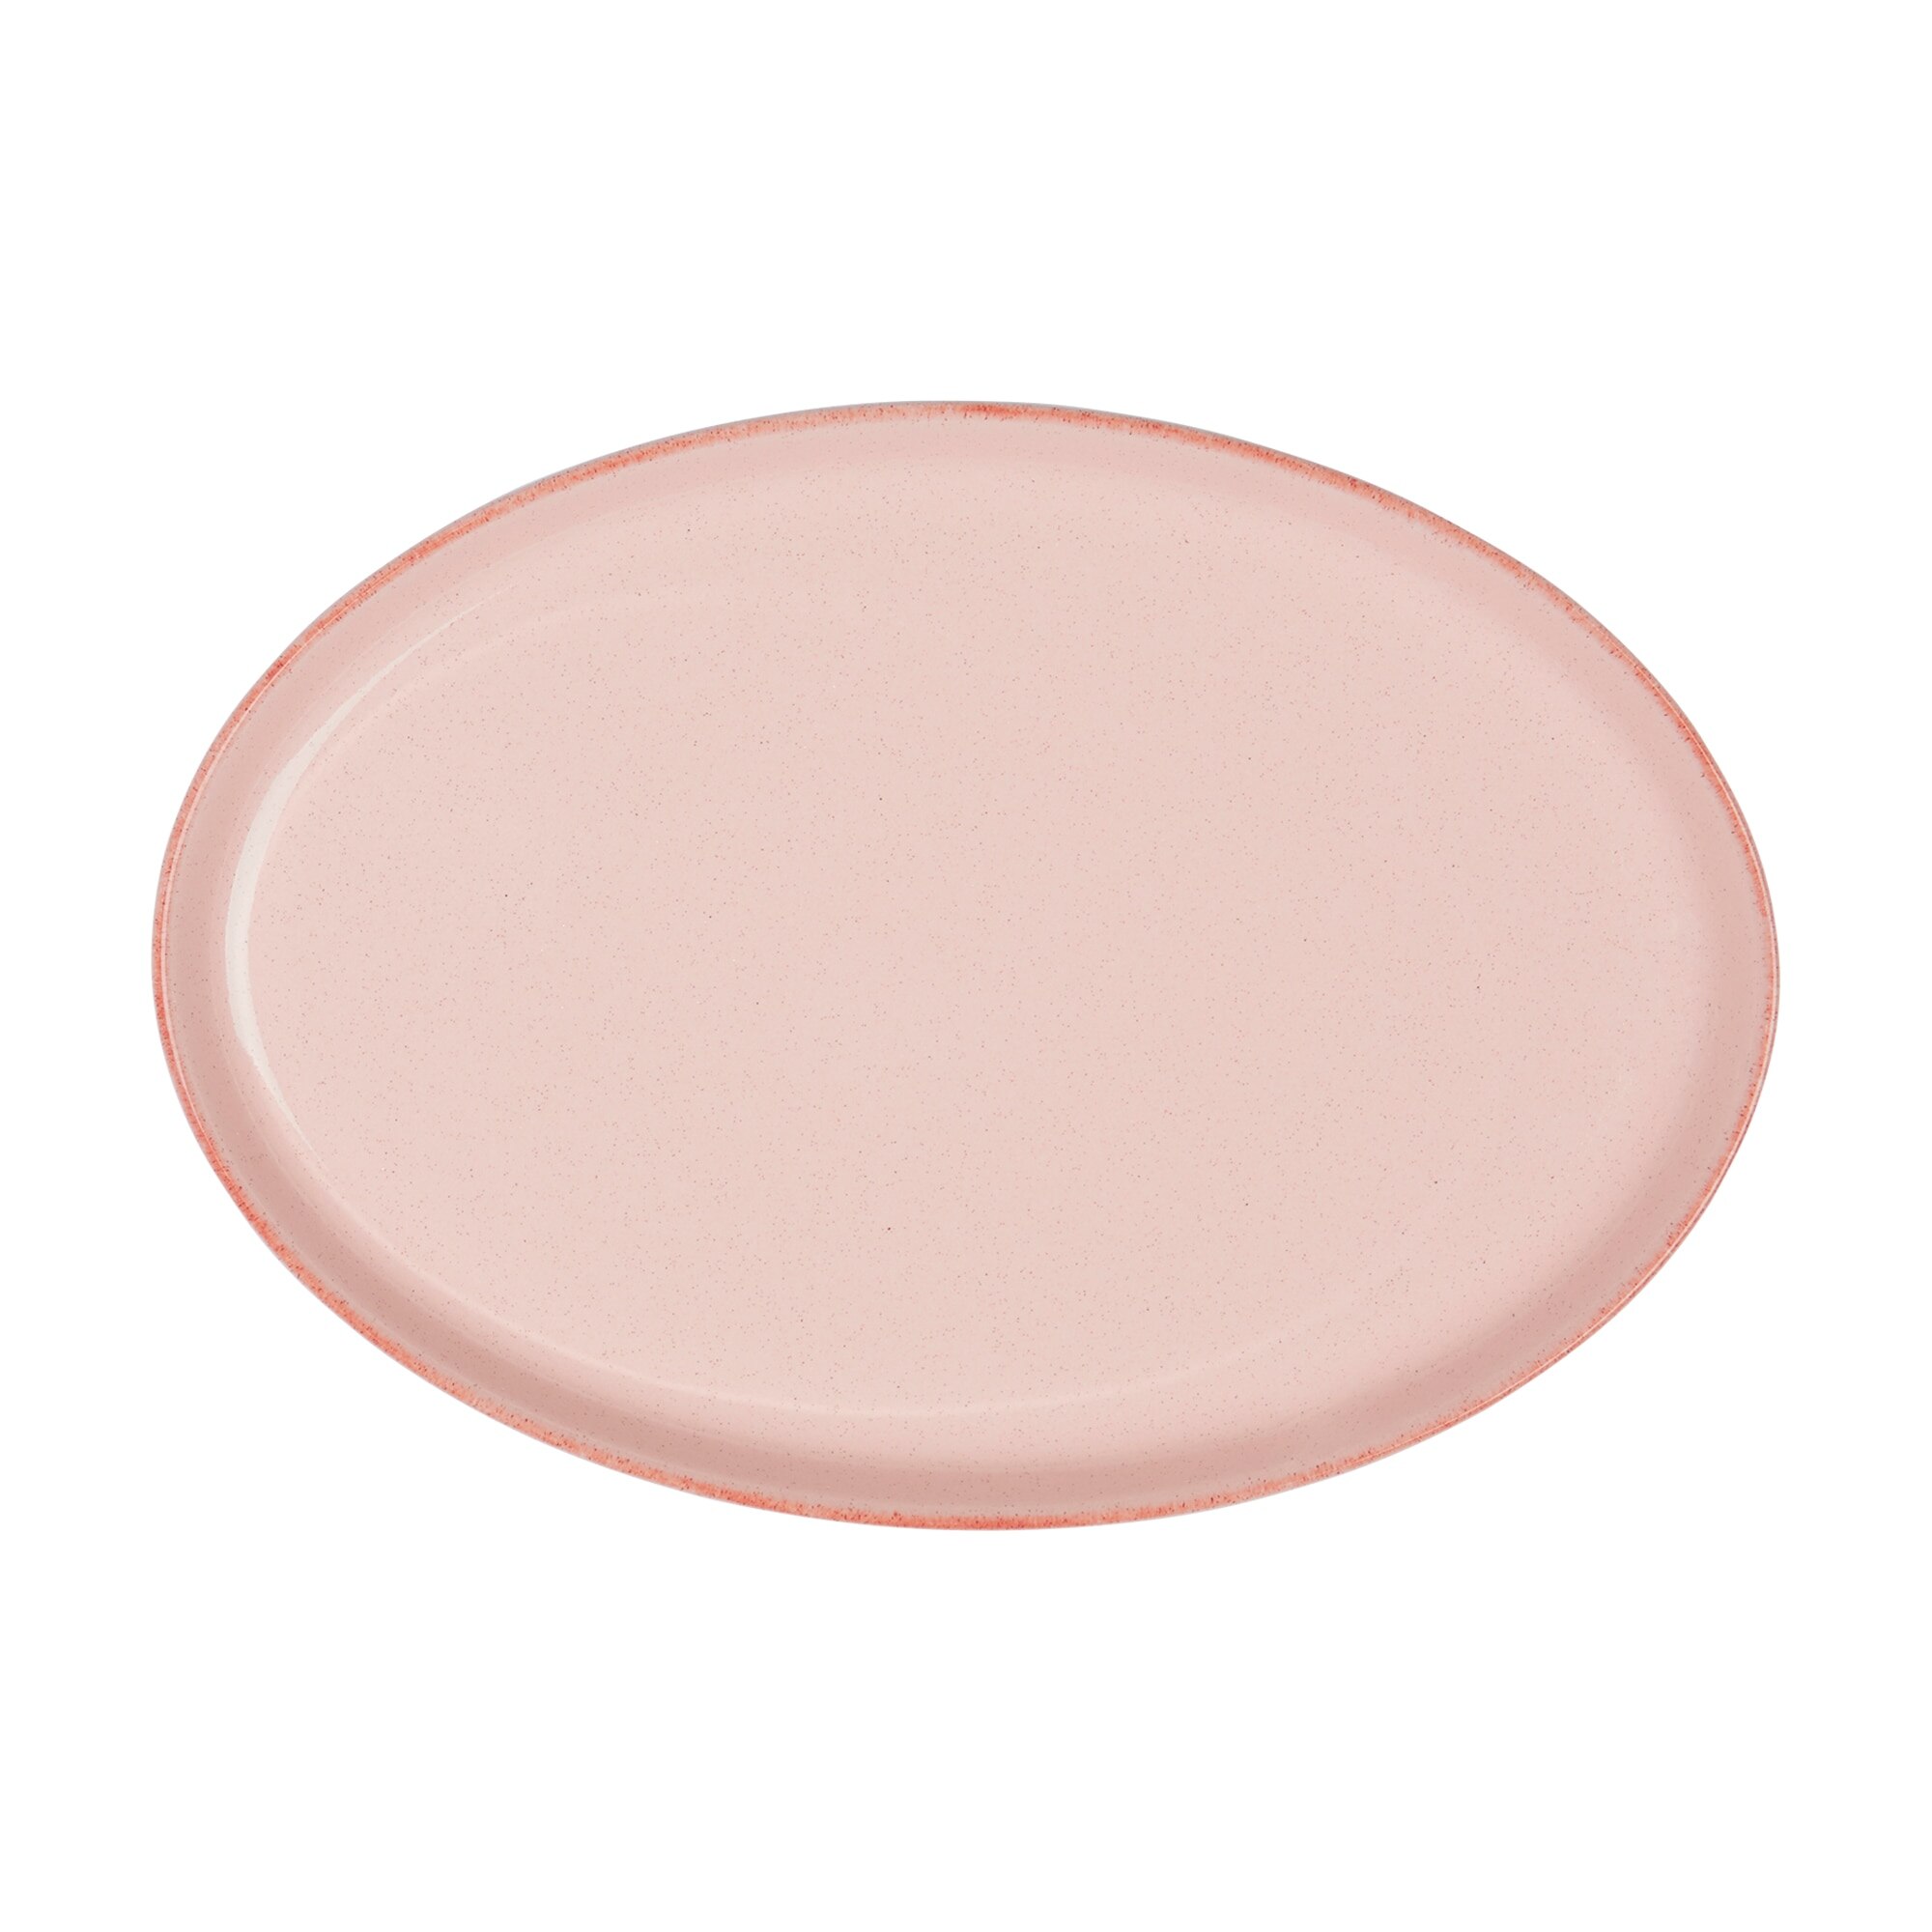 Heritage Piazza Medium Oval Tray Seconds